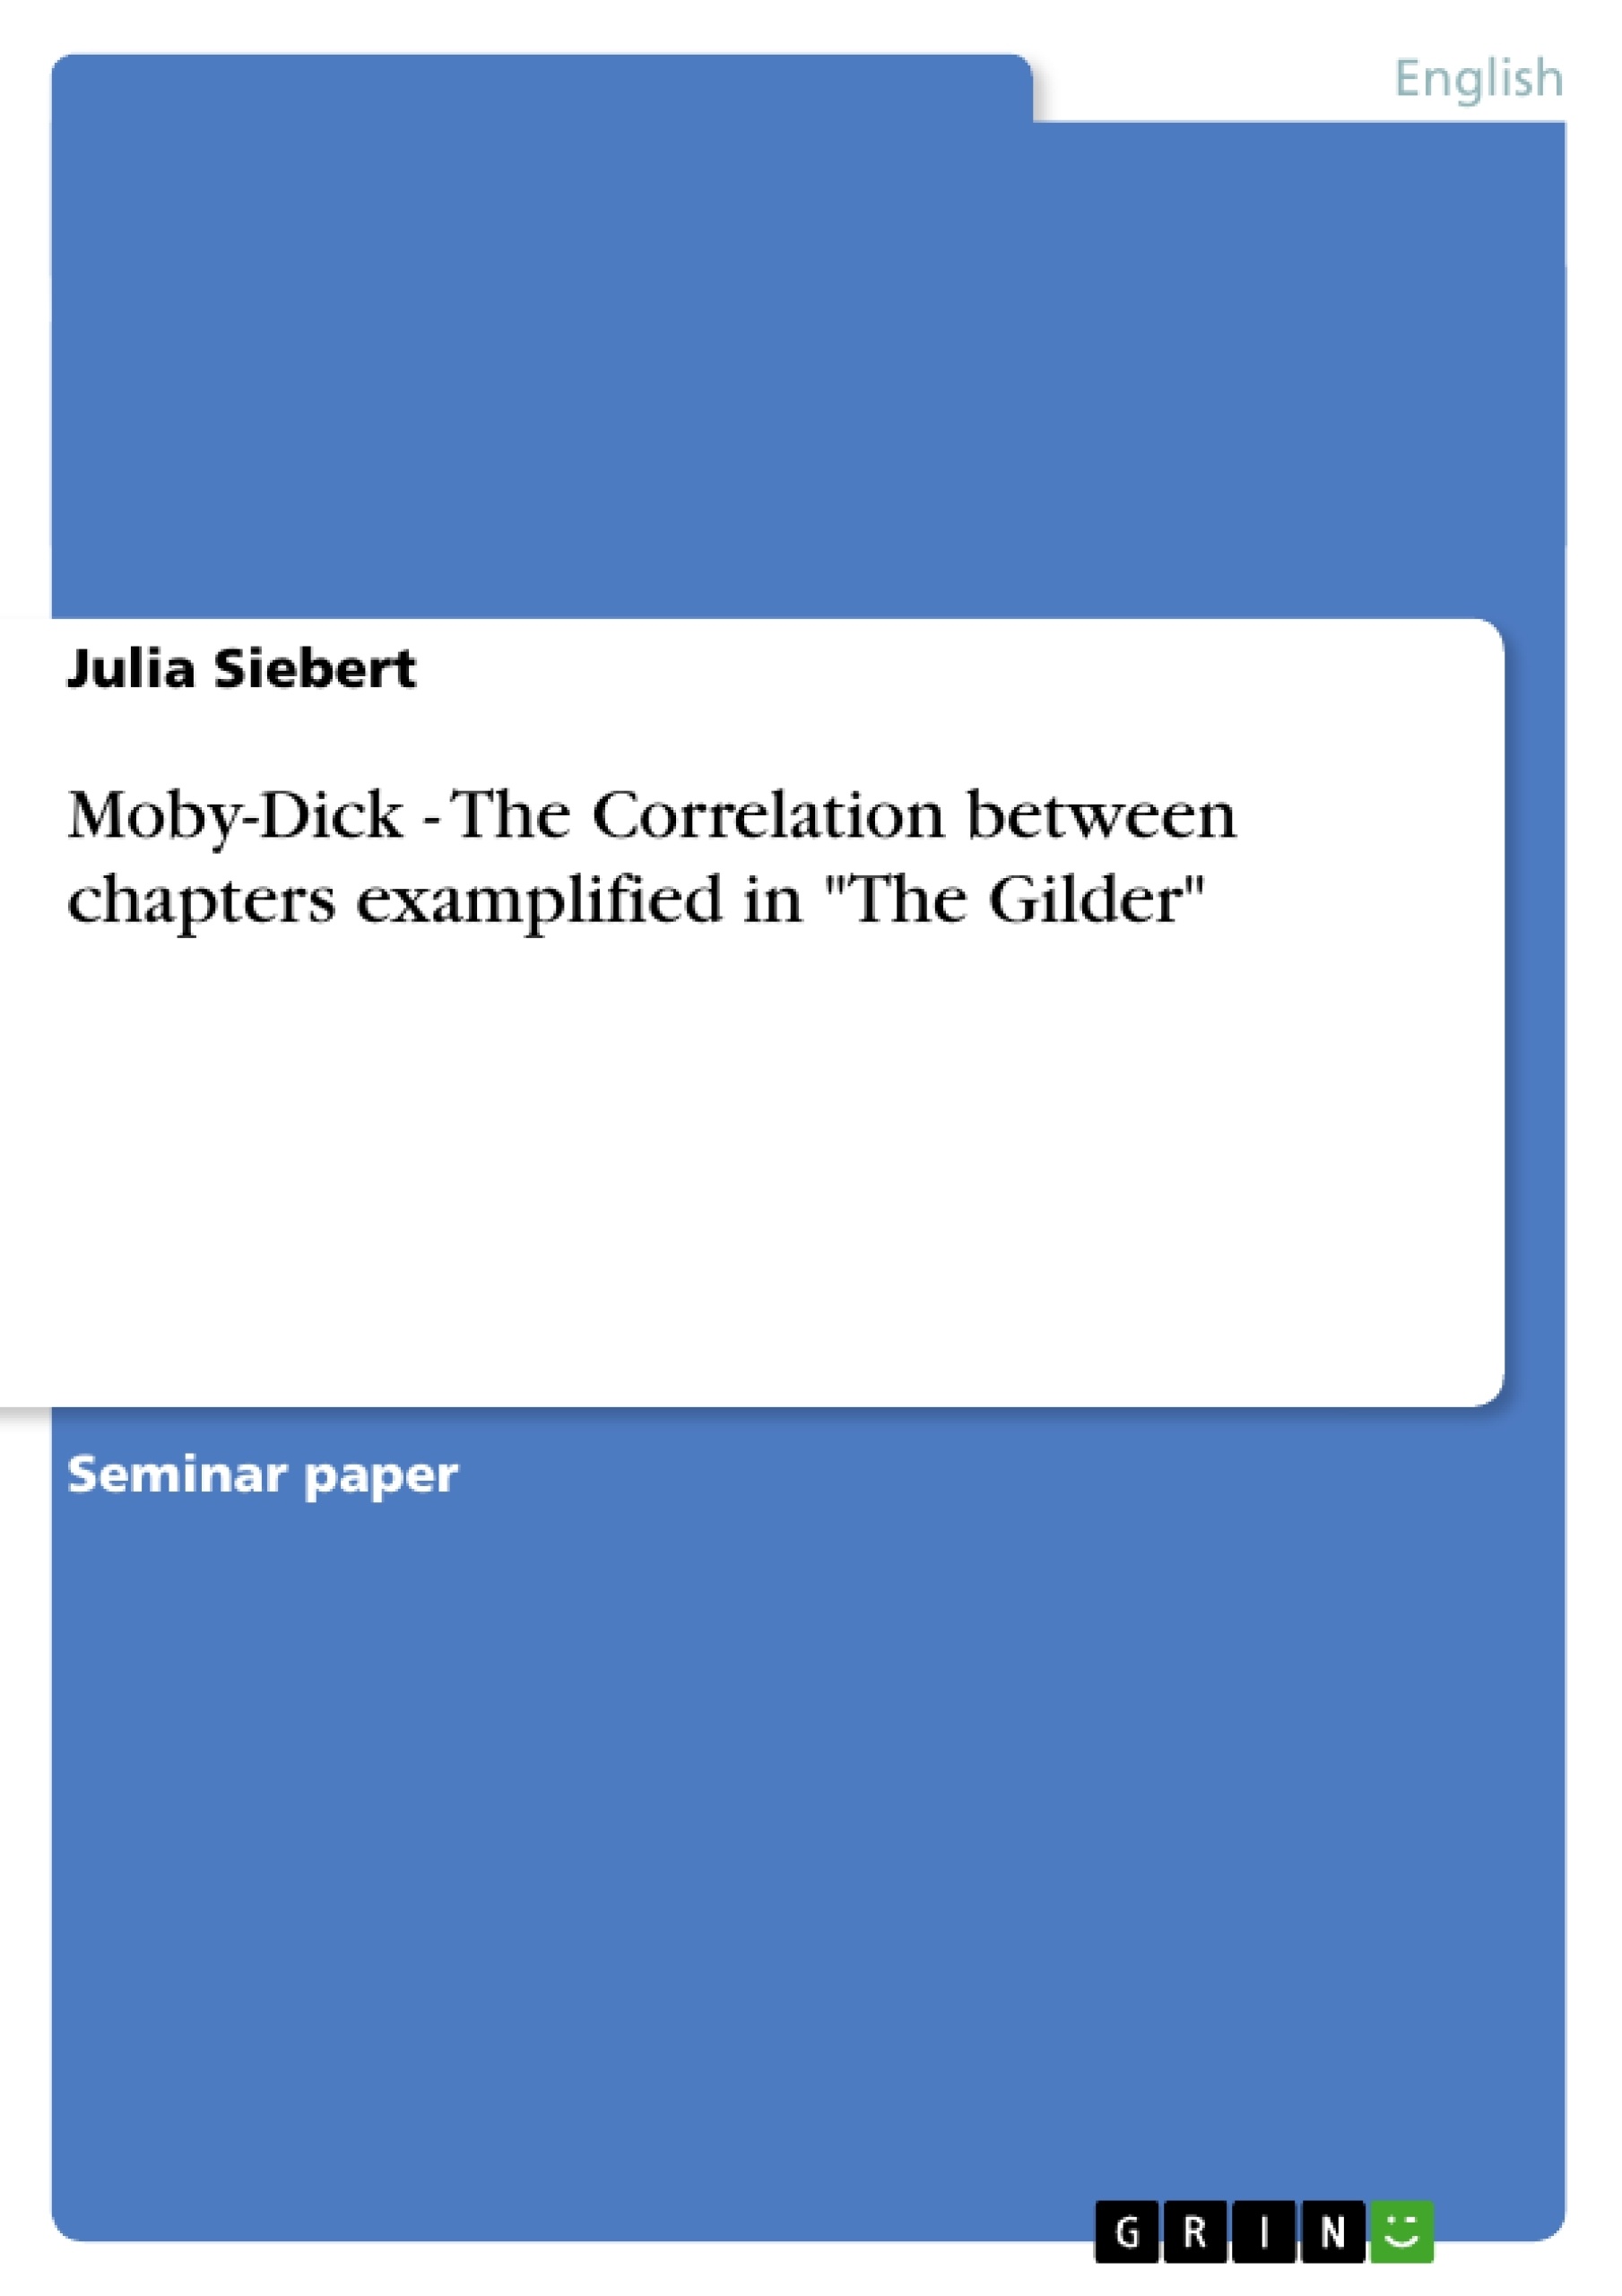 Title: Moby-Dick - The Correlation between chapters examplified in "The Gilder"